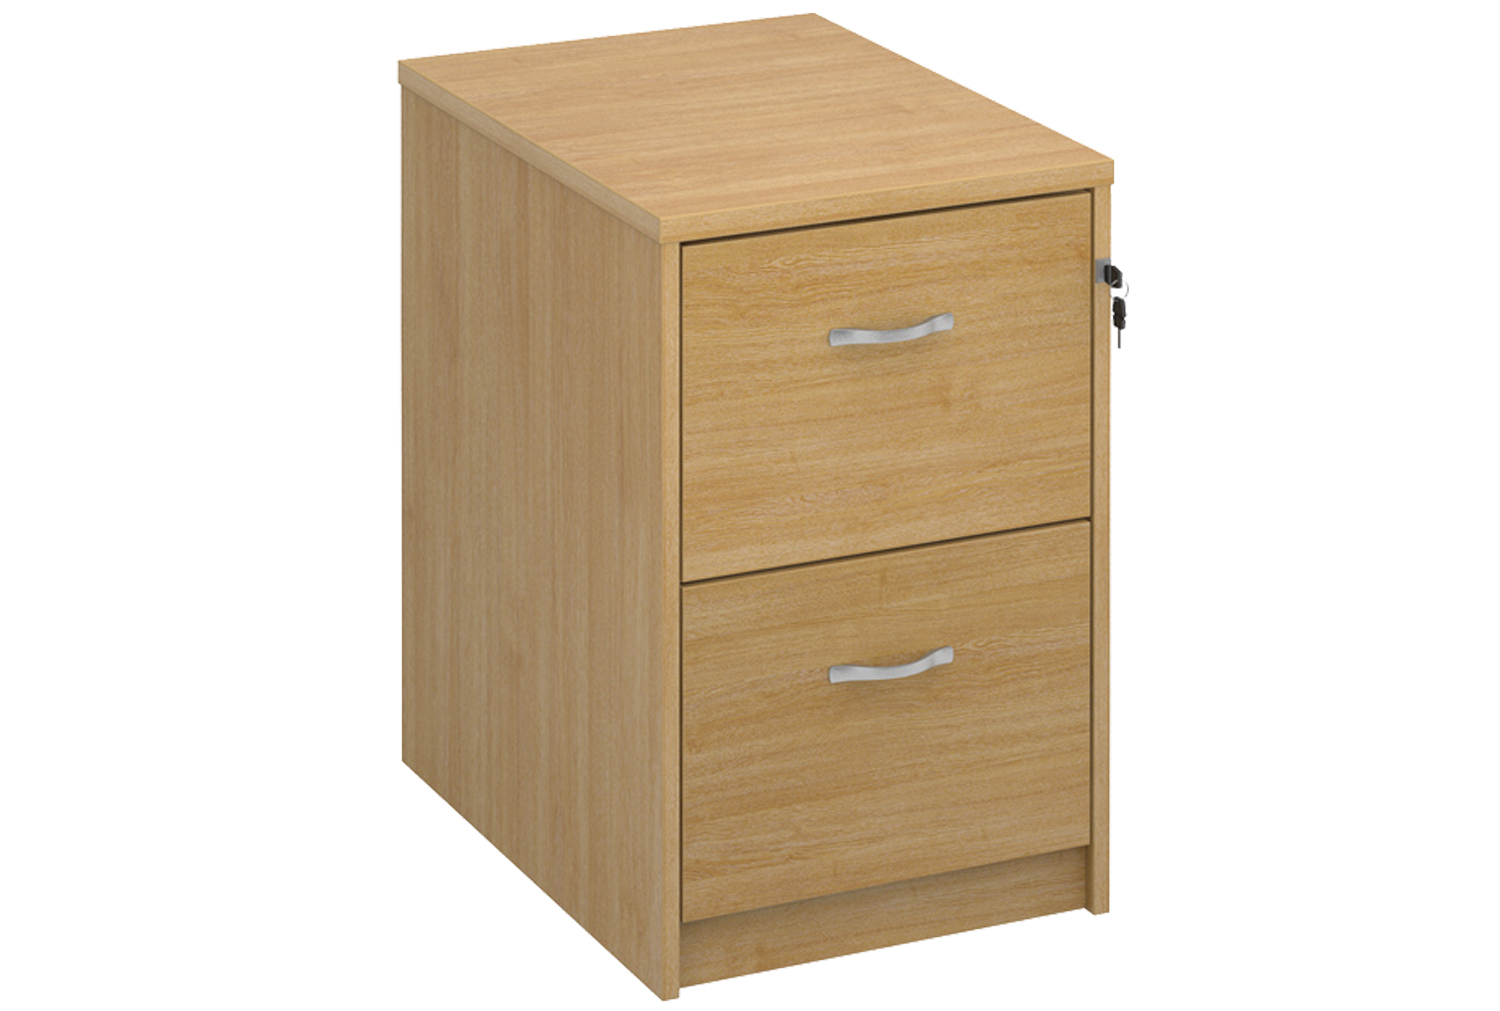 All Oak Filing Cabinet, 2 Drawer - 48wx66dx73h (cm), Express Delivery